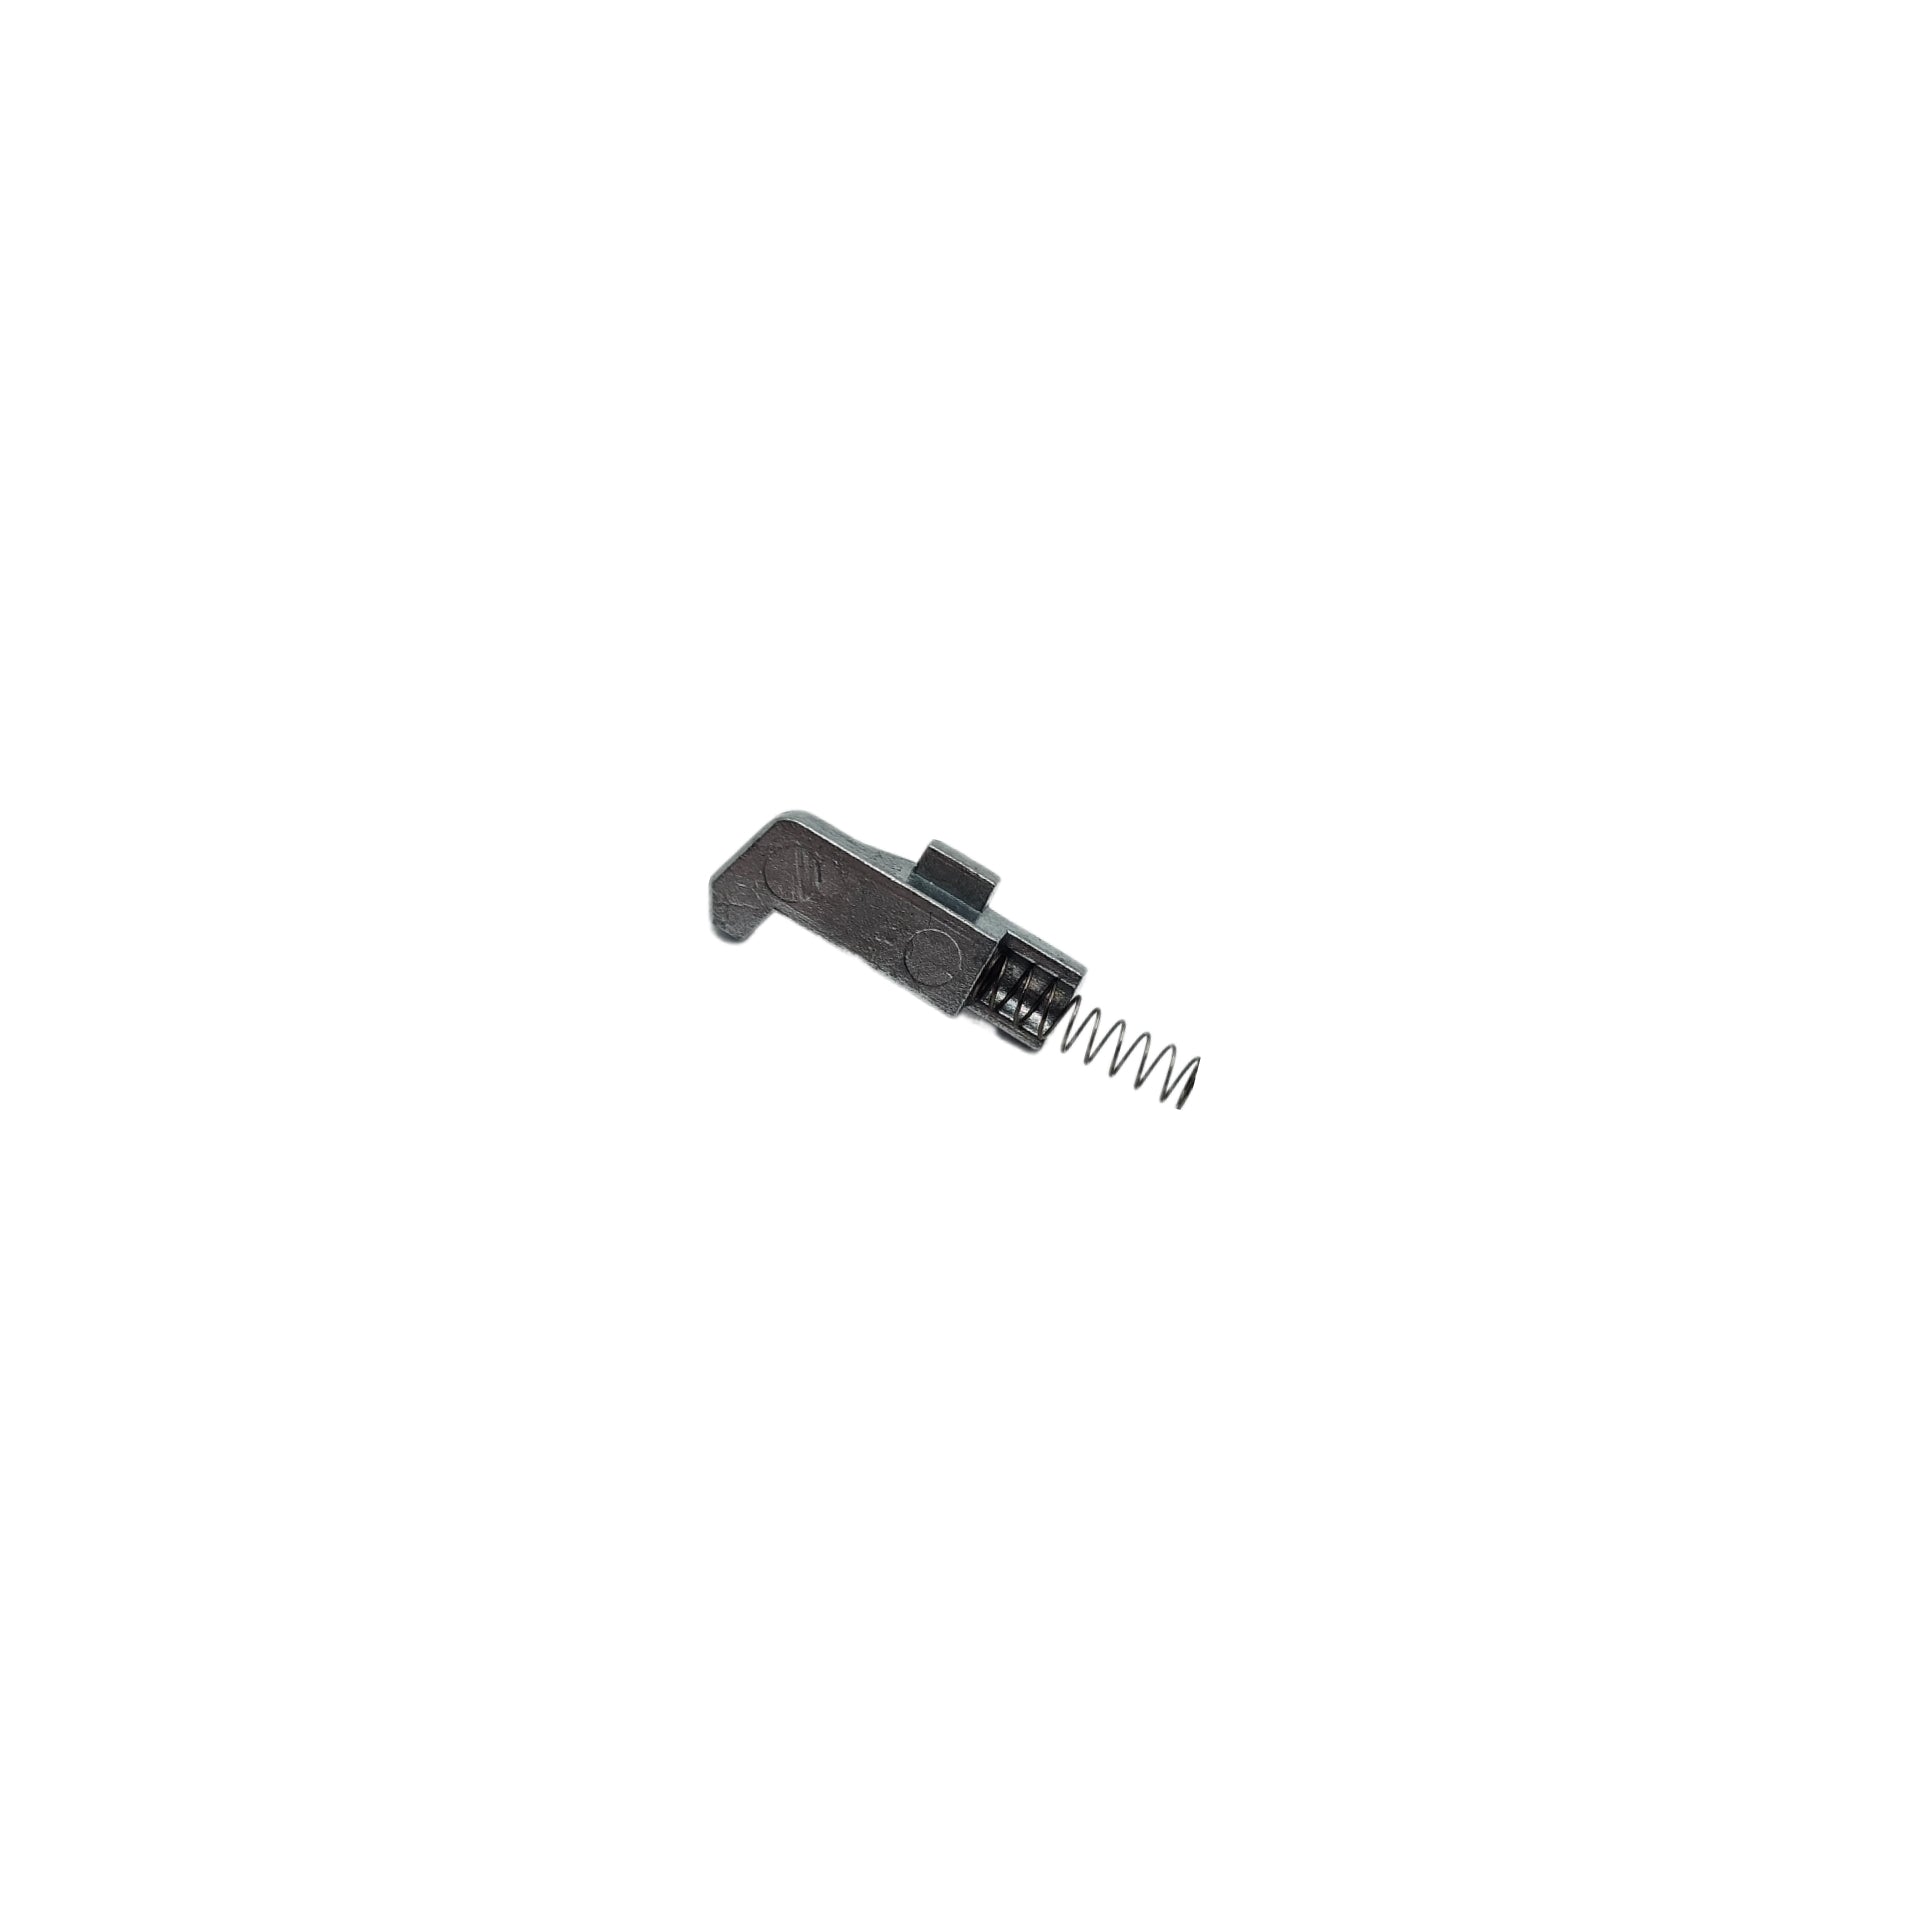 WE Hi-Capa Full Auto Series Replacement Part - 208 211 - Valve Knocker Sear and Spring